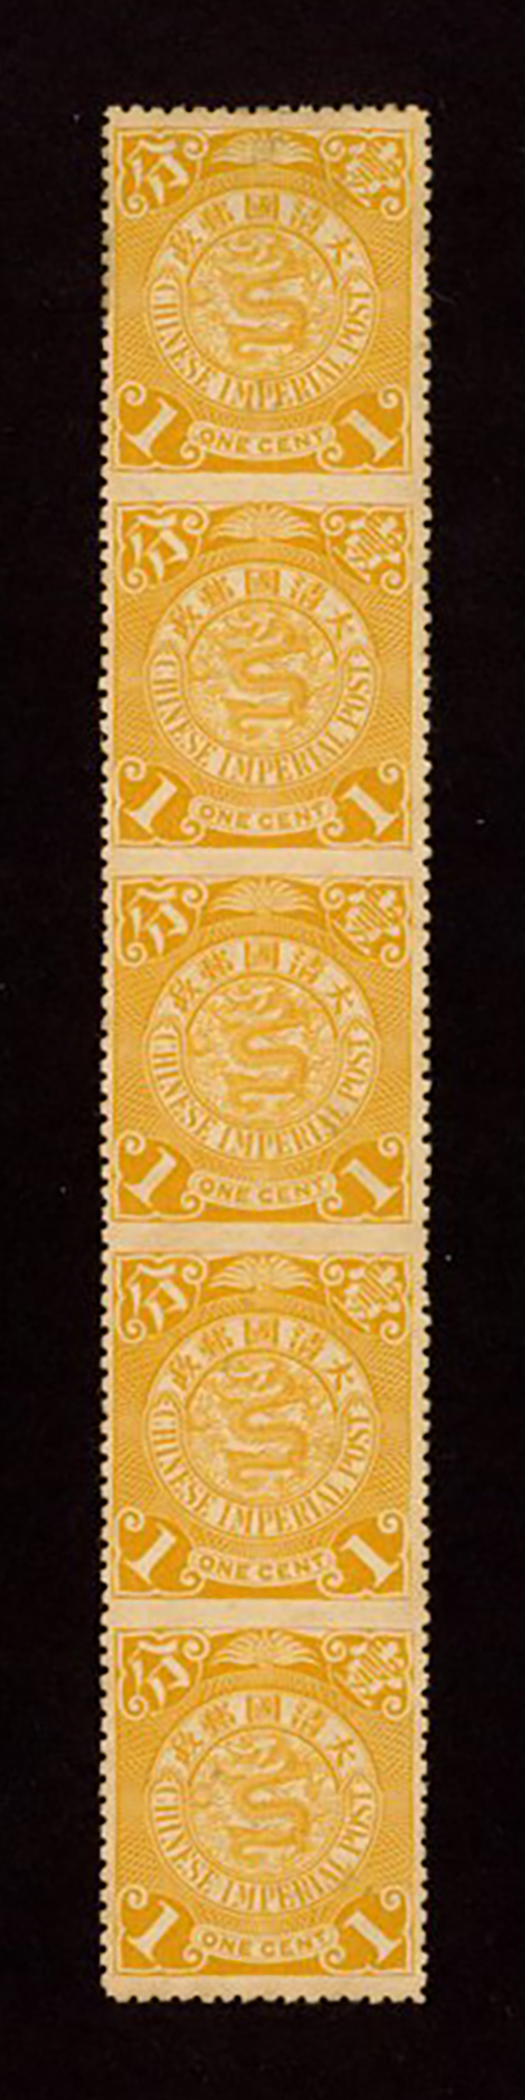 111 variety, CSS 126k, Chan 117k, 1900-06 C.I.P. 1c. yellow, vertical strip of five imperforate between, top and bottom stamps have hinge remnants